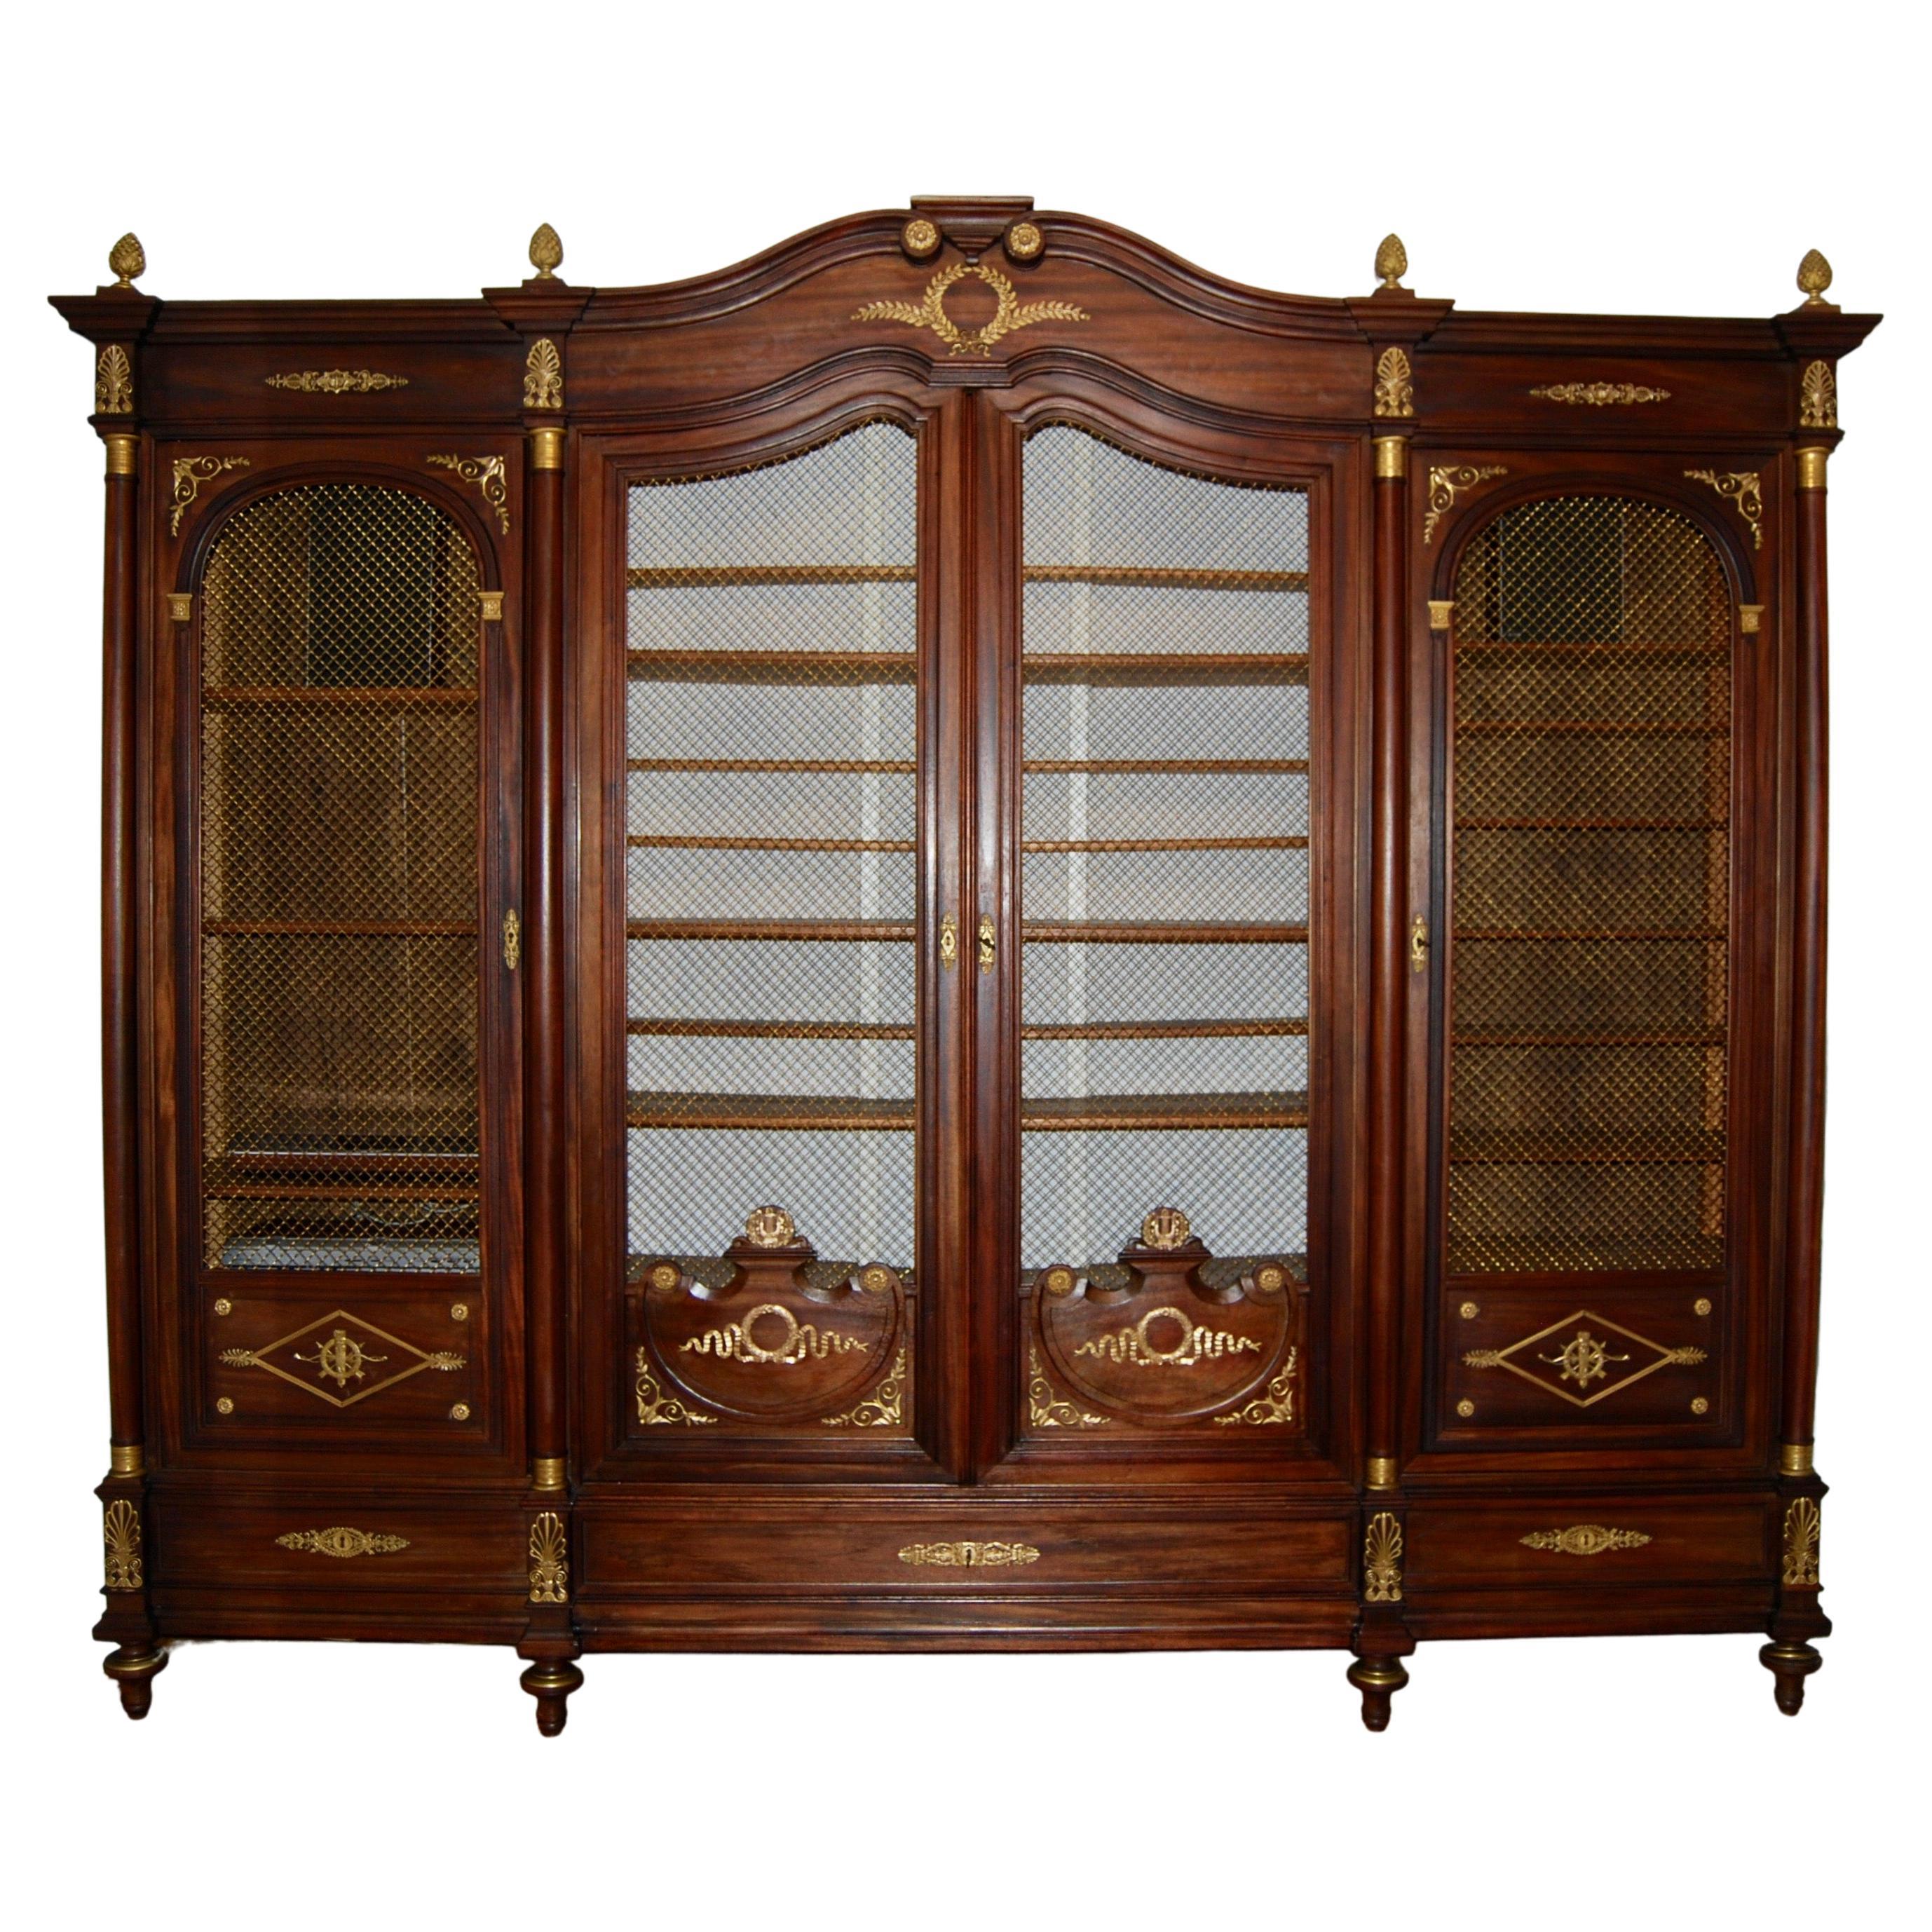 Large French Bibliothéque in Solid Mahogany, Late 1800s